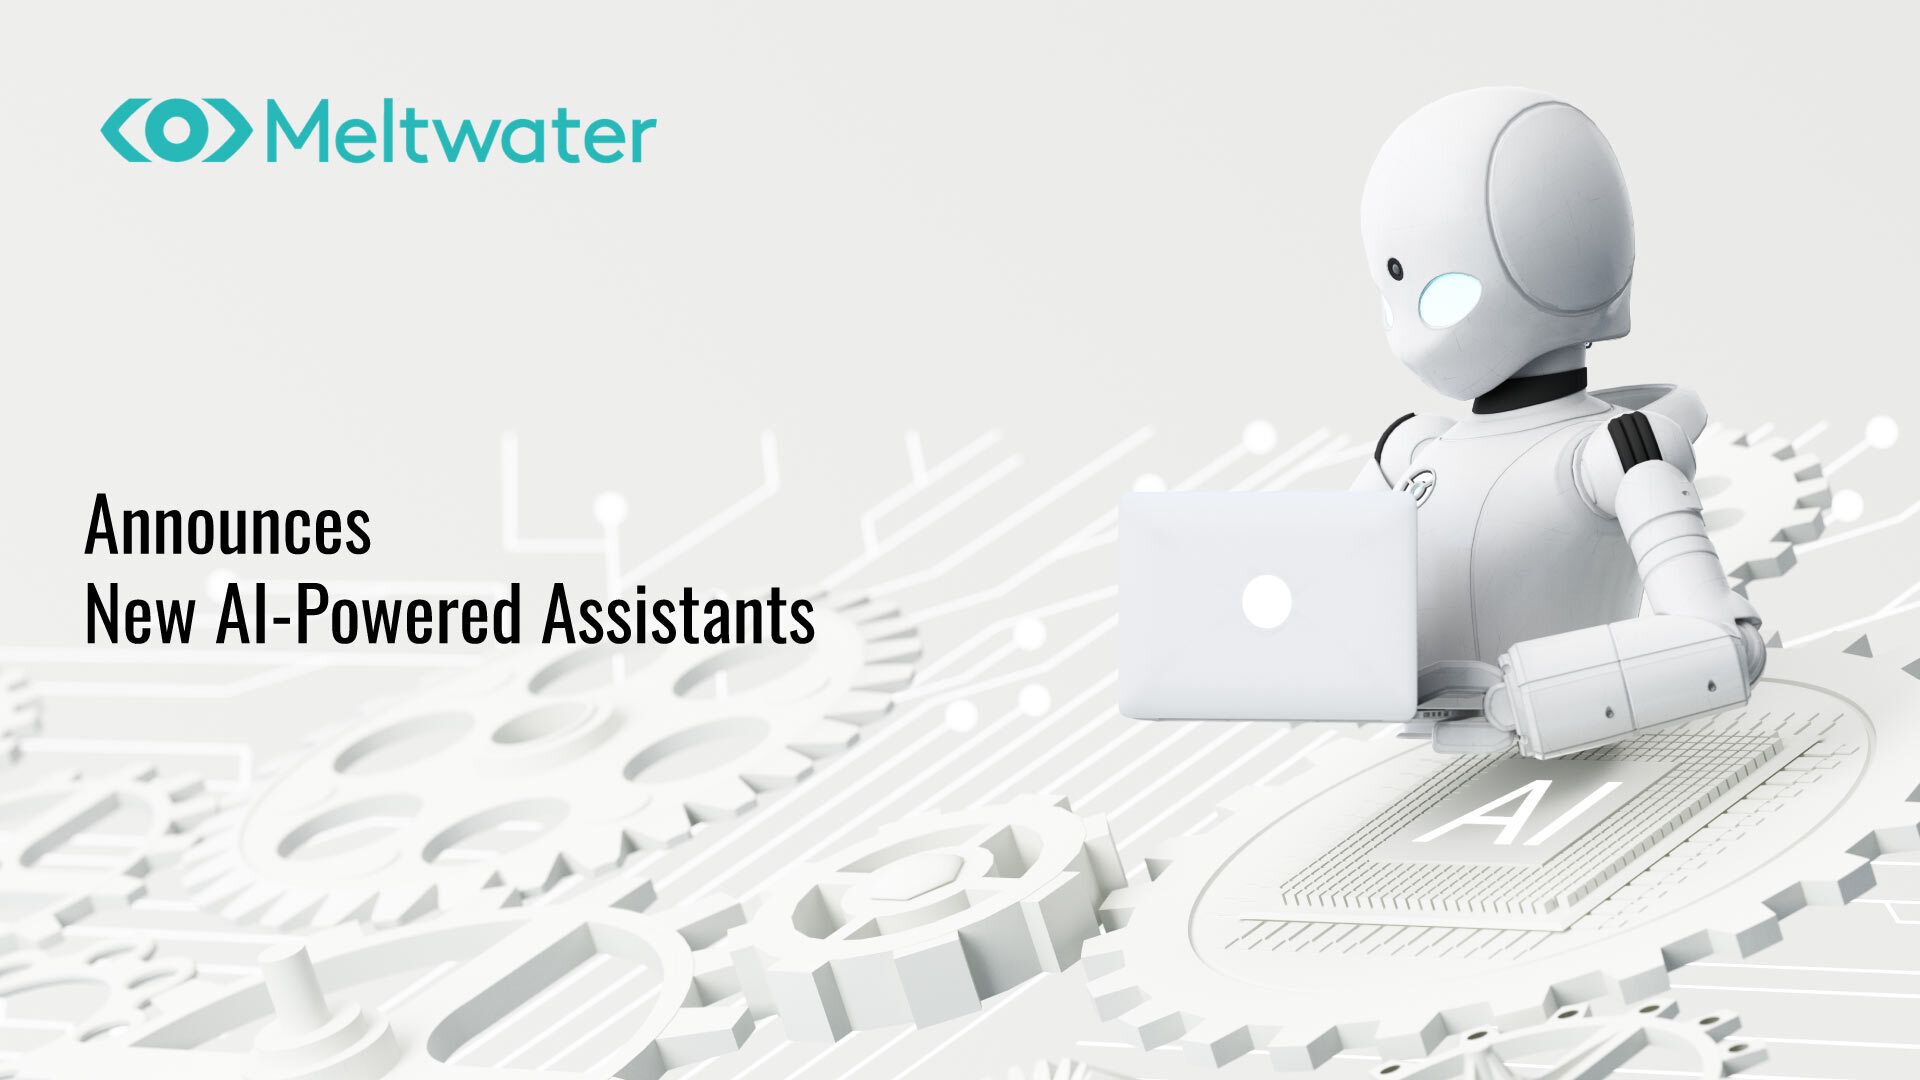 Meltwater announces new AI-powered assistants, summaries and analysis at Meltwater Summit